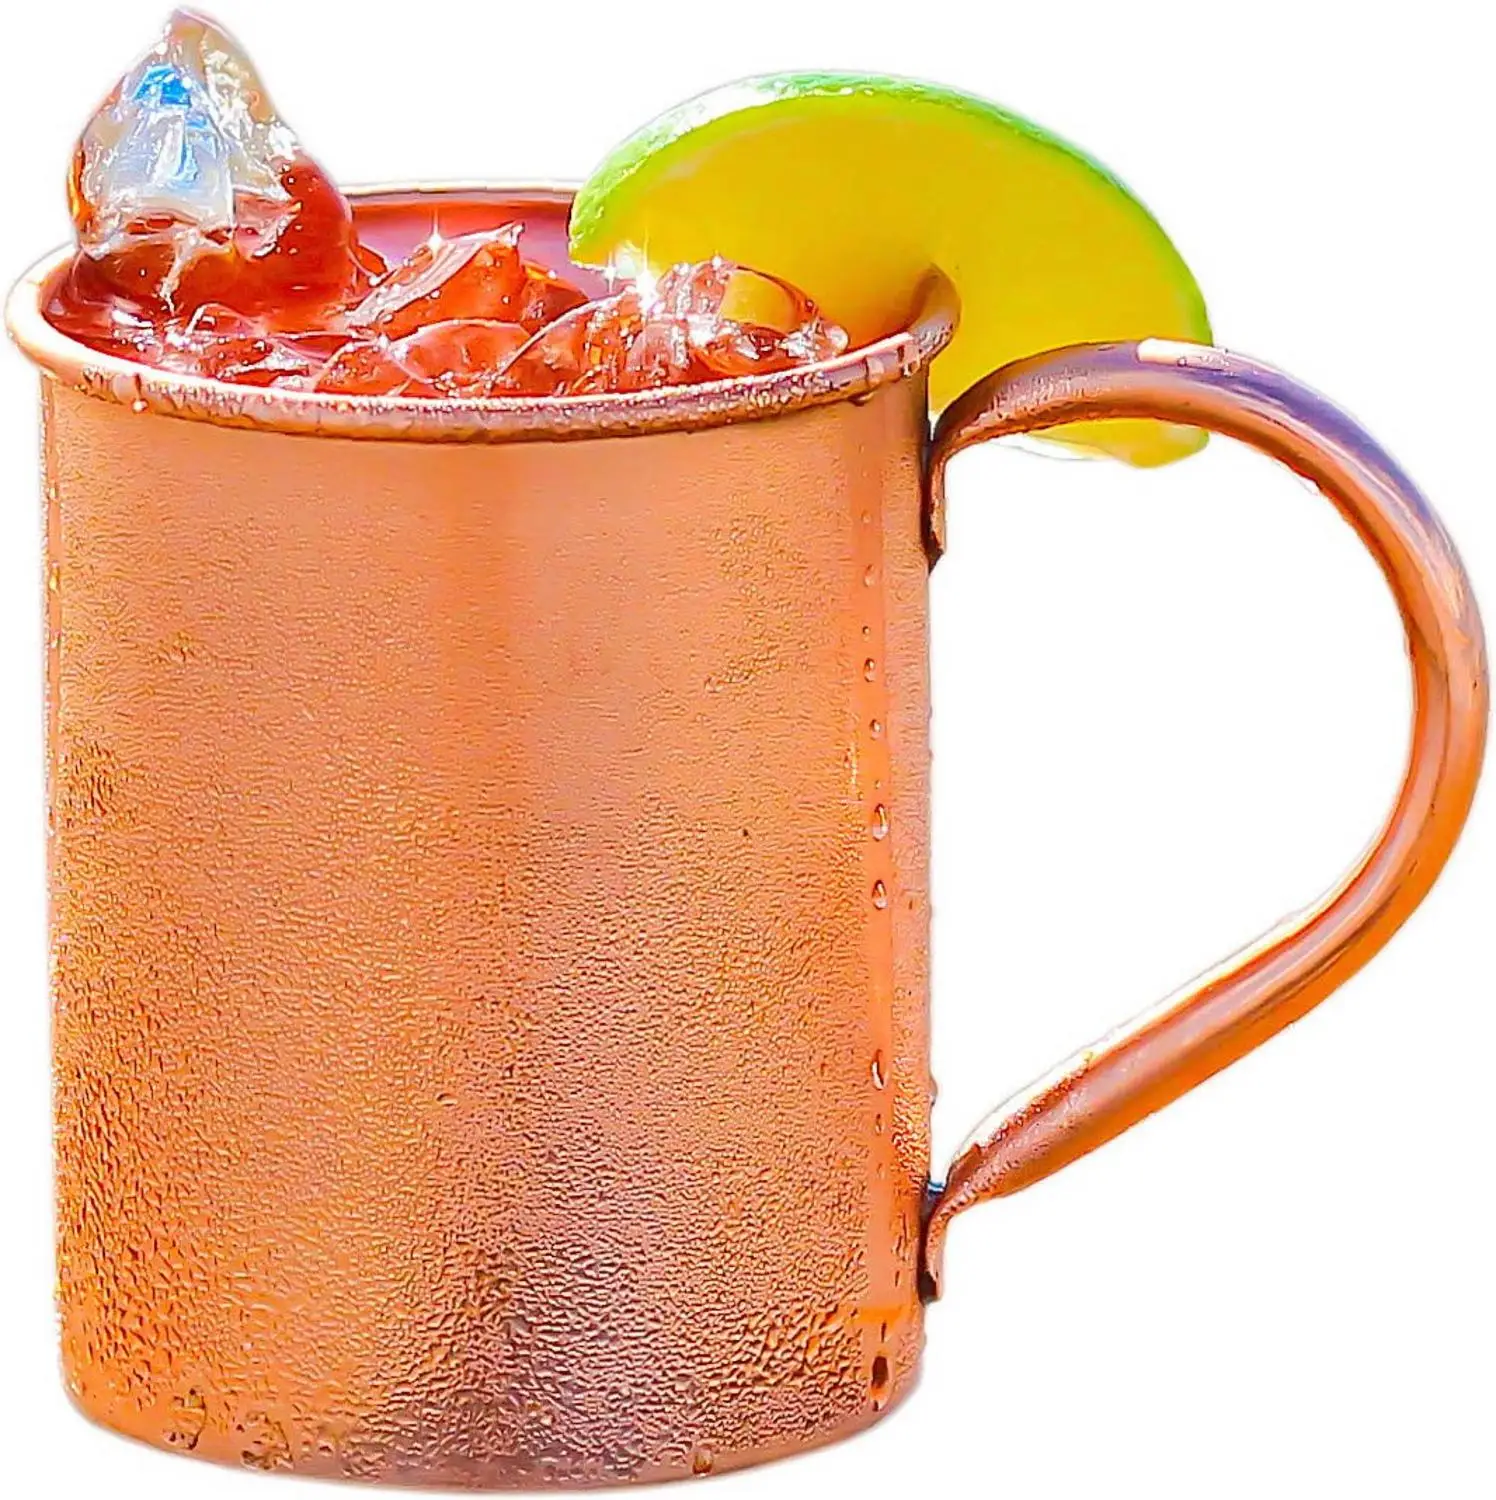 100%  pure copper moscow mule mug solid smooth without inside liner for cocktail coffee beer milk water